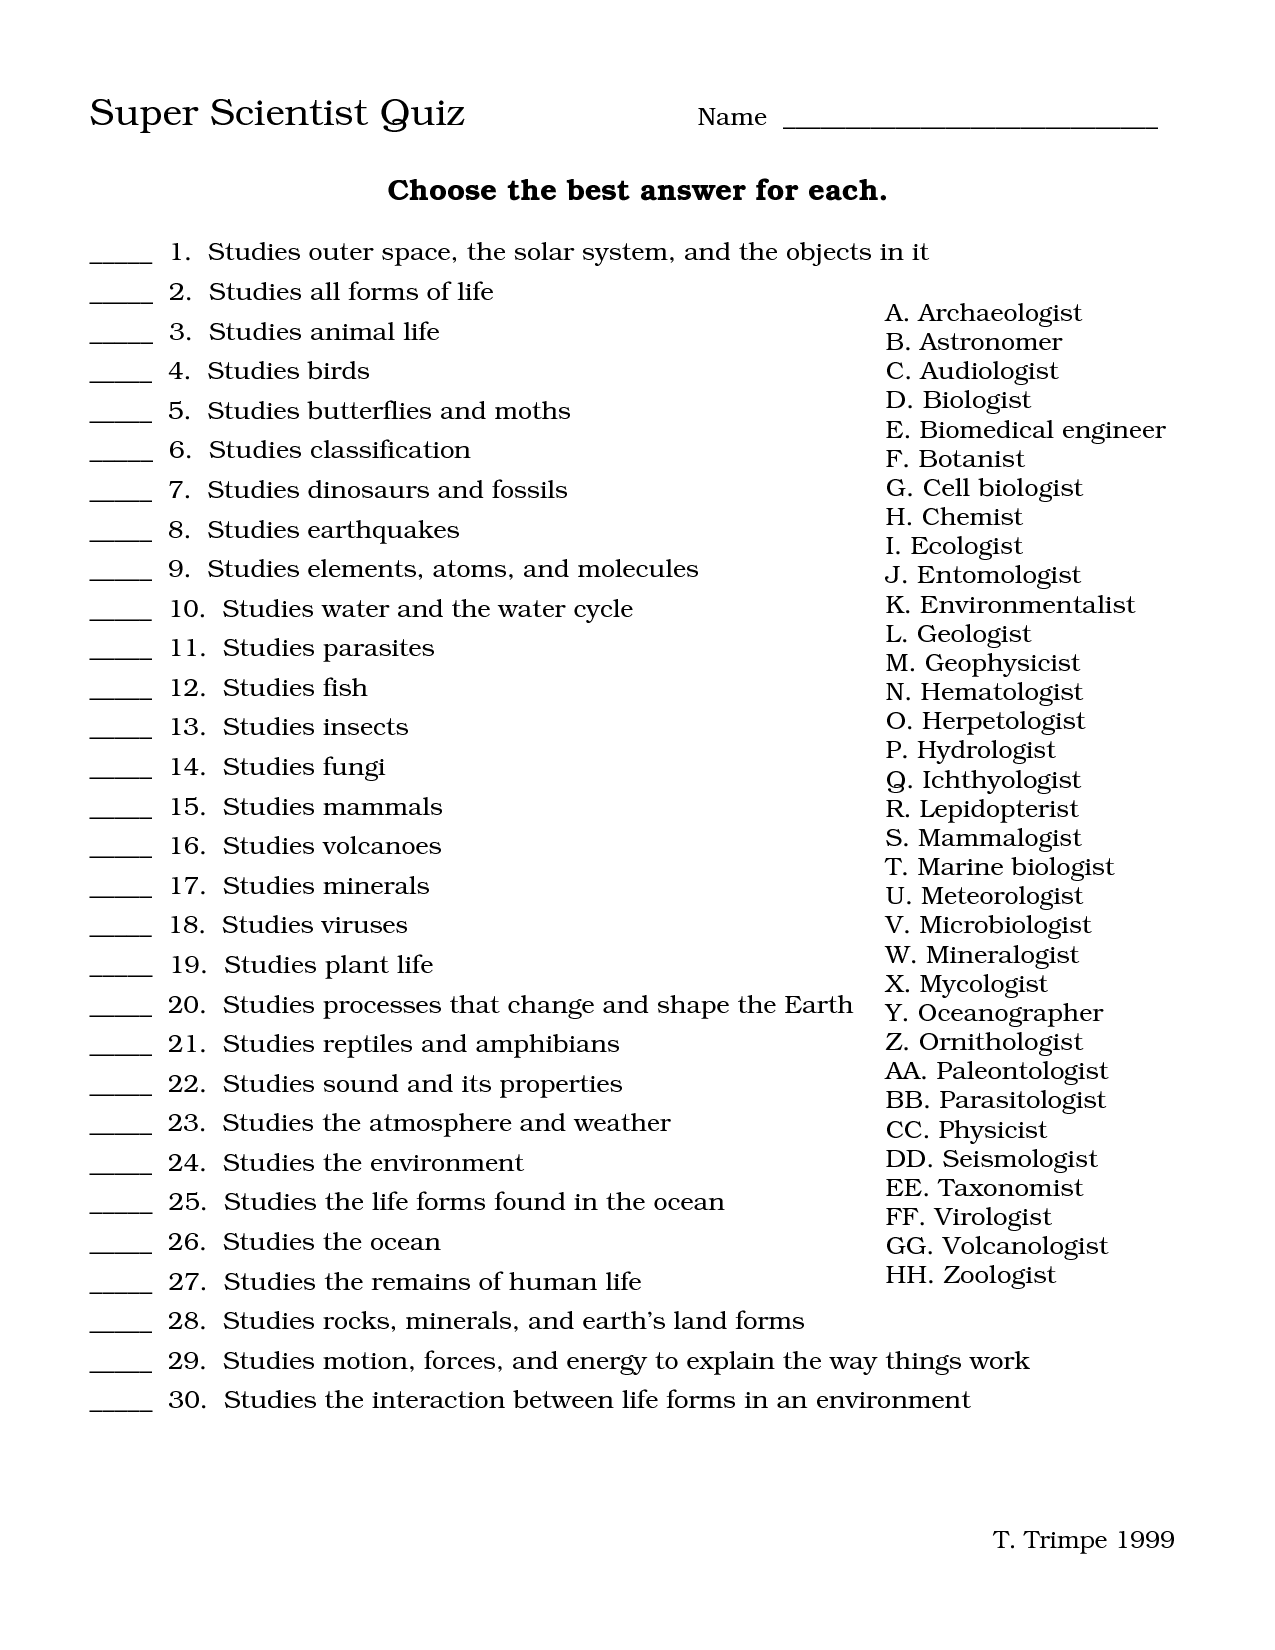 teacher-answer-key-and-the-worksheet